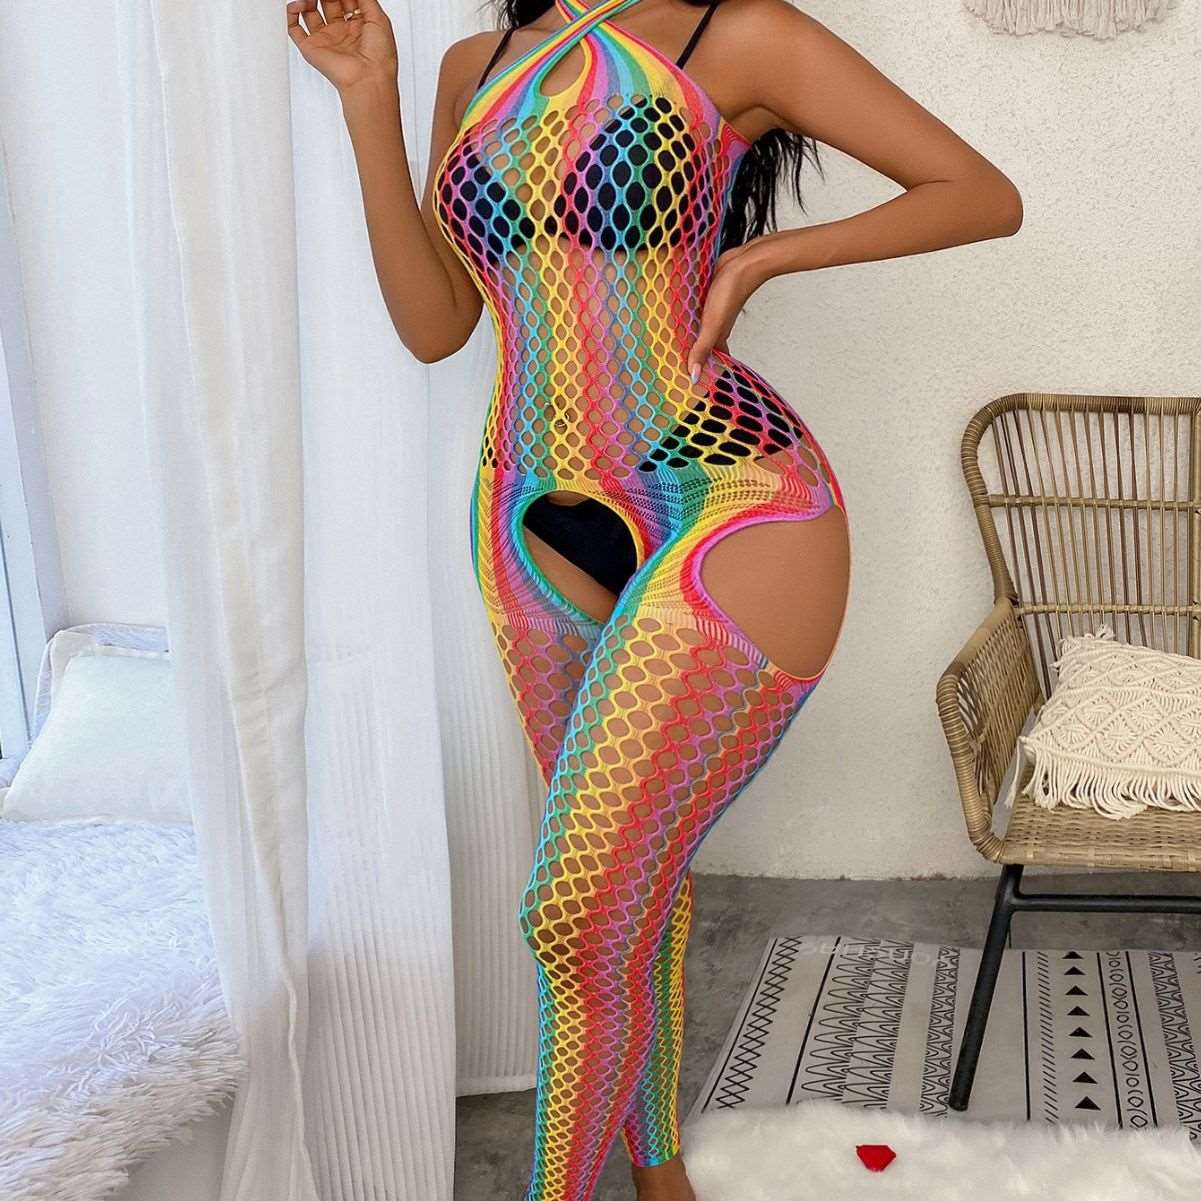 Irresistible Allure: Cross-Border European and American Rainbow Bodystocking - One Size Fits All